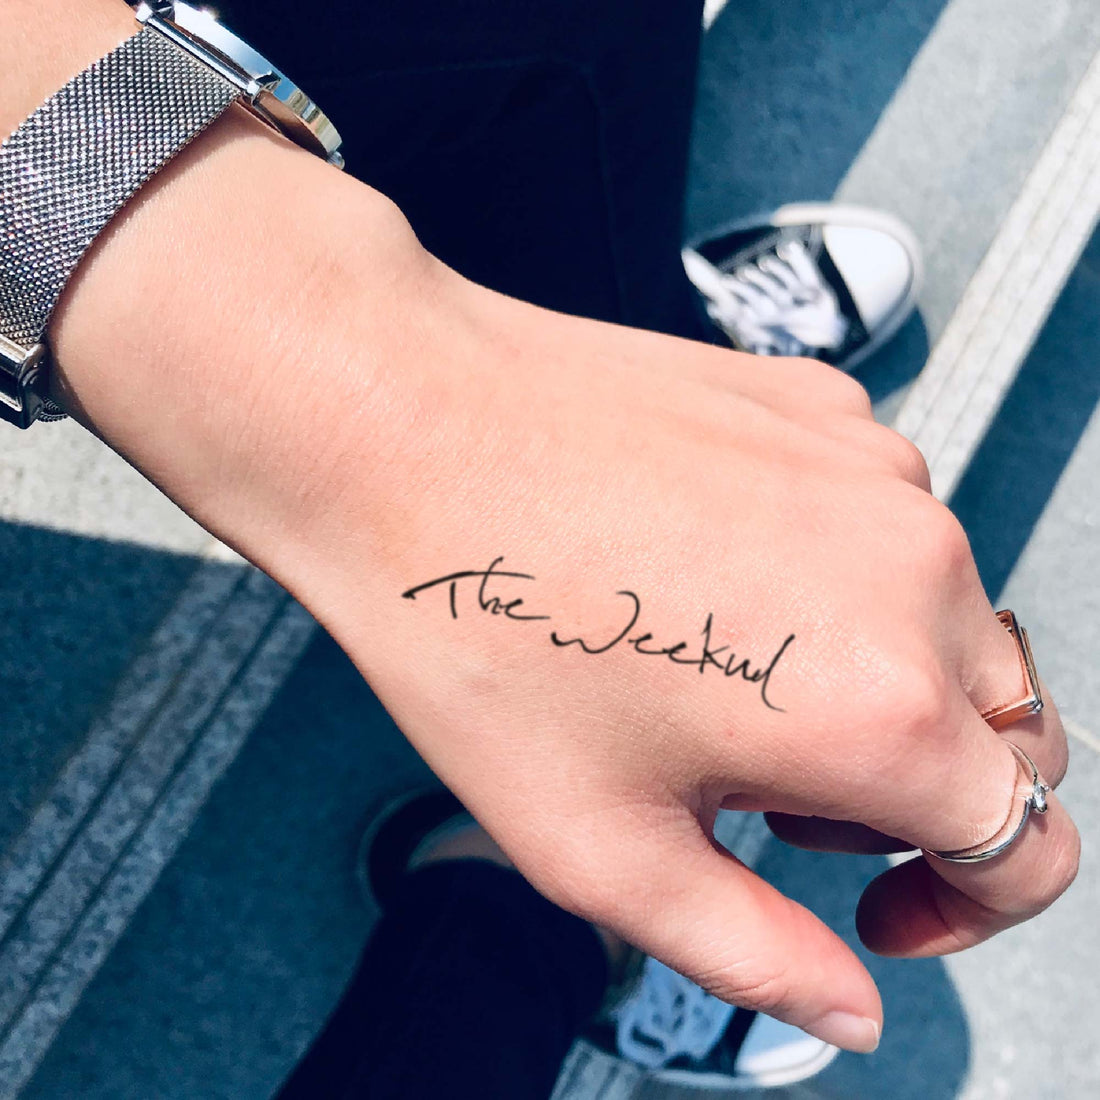 The Weeknd custom temporary tattoo sticker design idea inspiration meanings removal arm wrist hand words font name signature calligraphy lyrics tour concert outfits merch accessory gift souvenir costumes wear dress up code